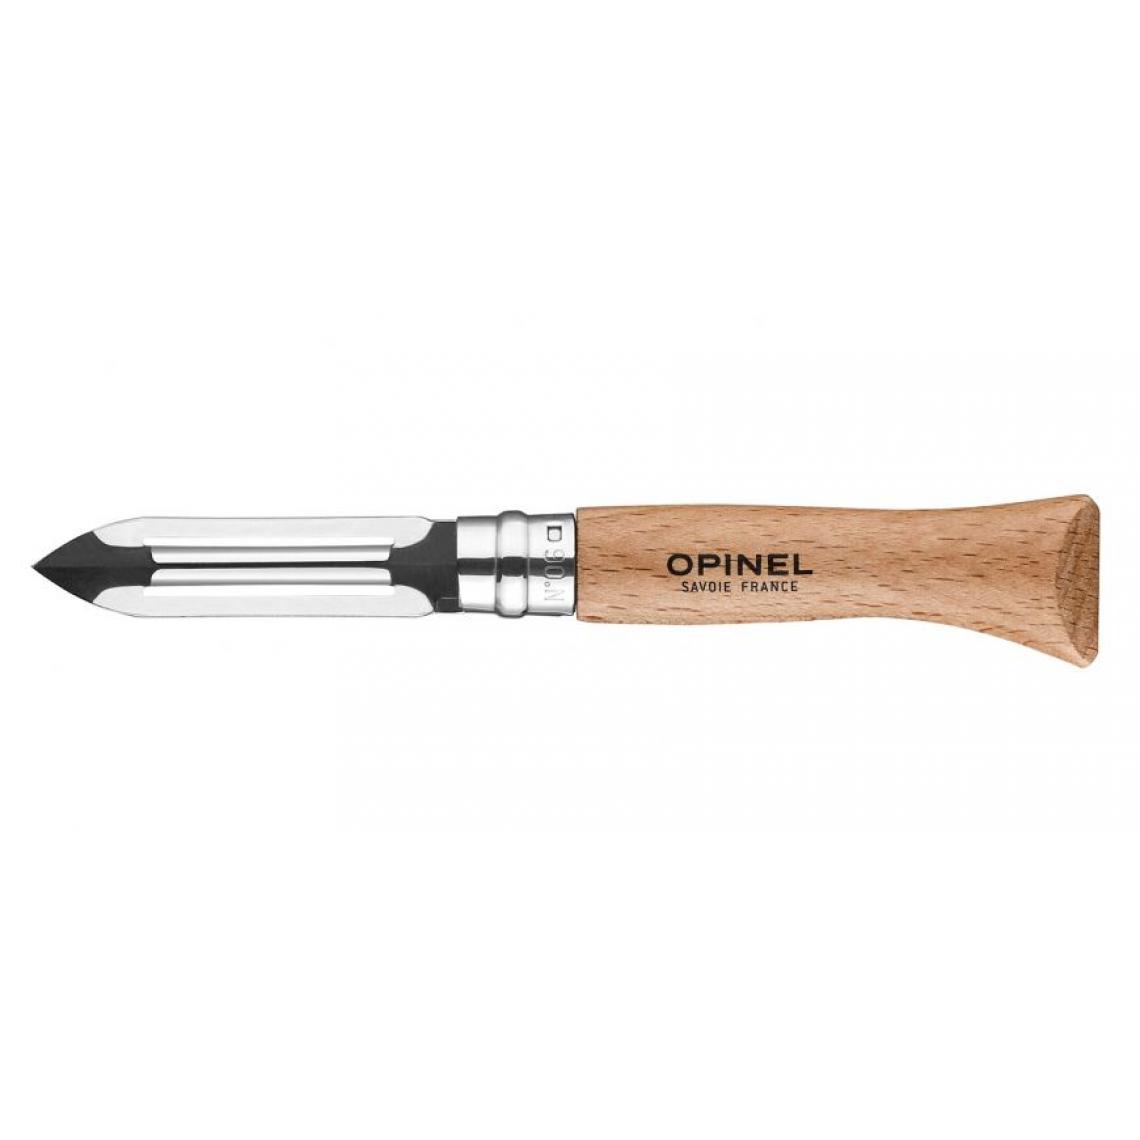 Opinel - Couteau éplucheur N°6 OPINEL - 002440 - Outils de coupe